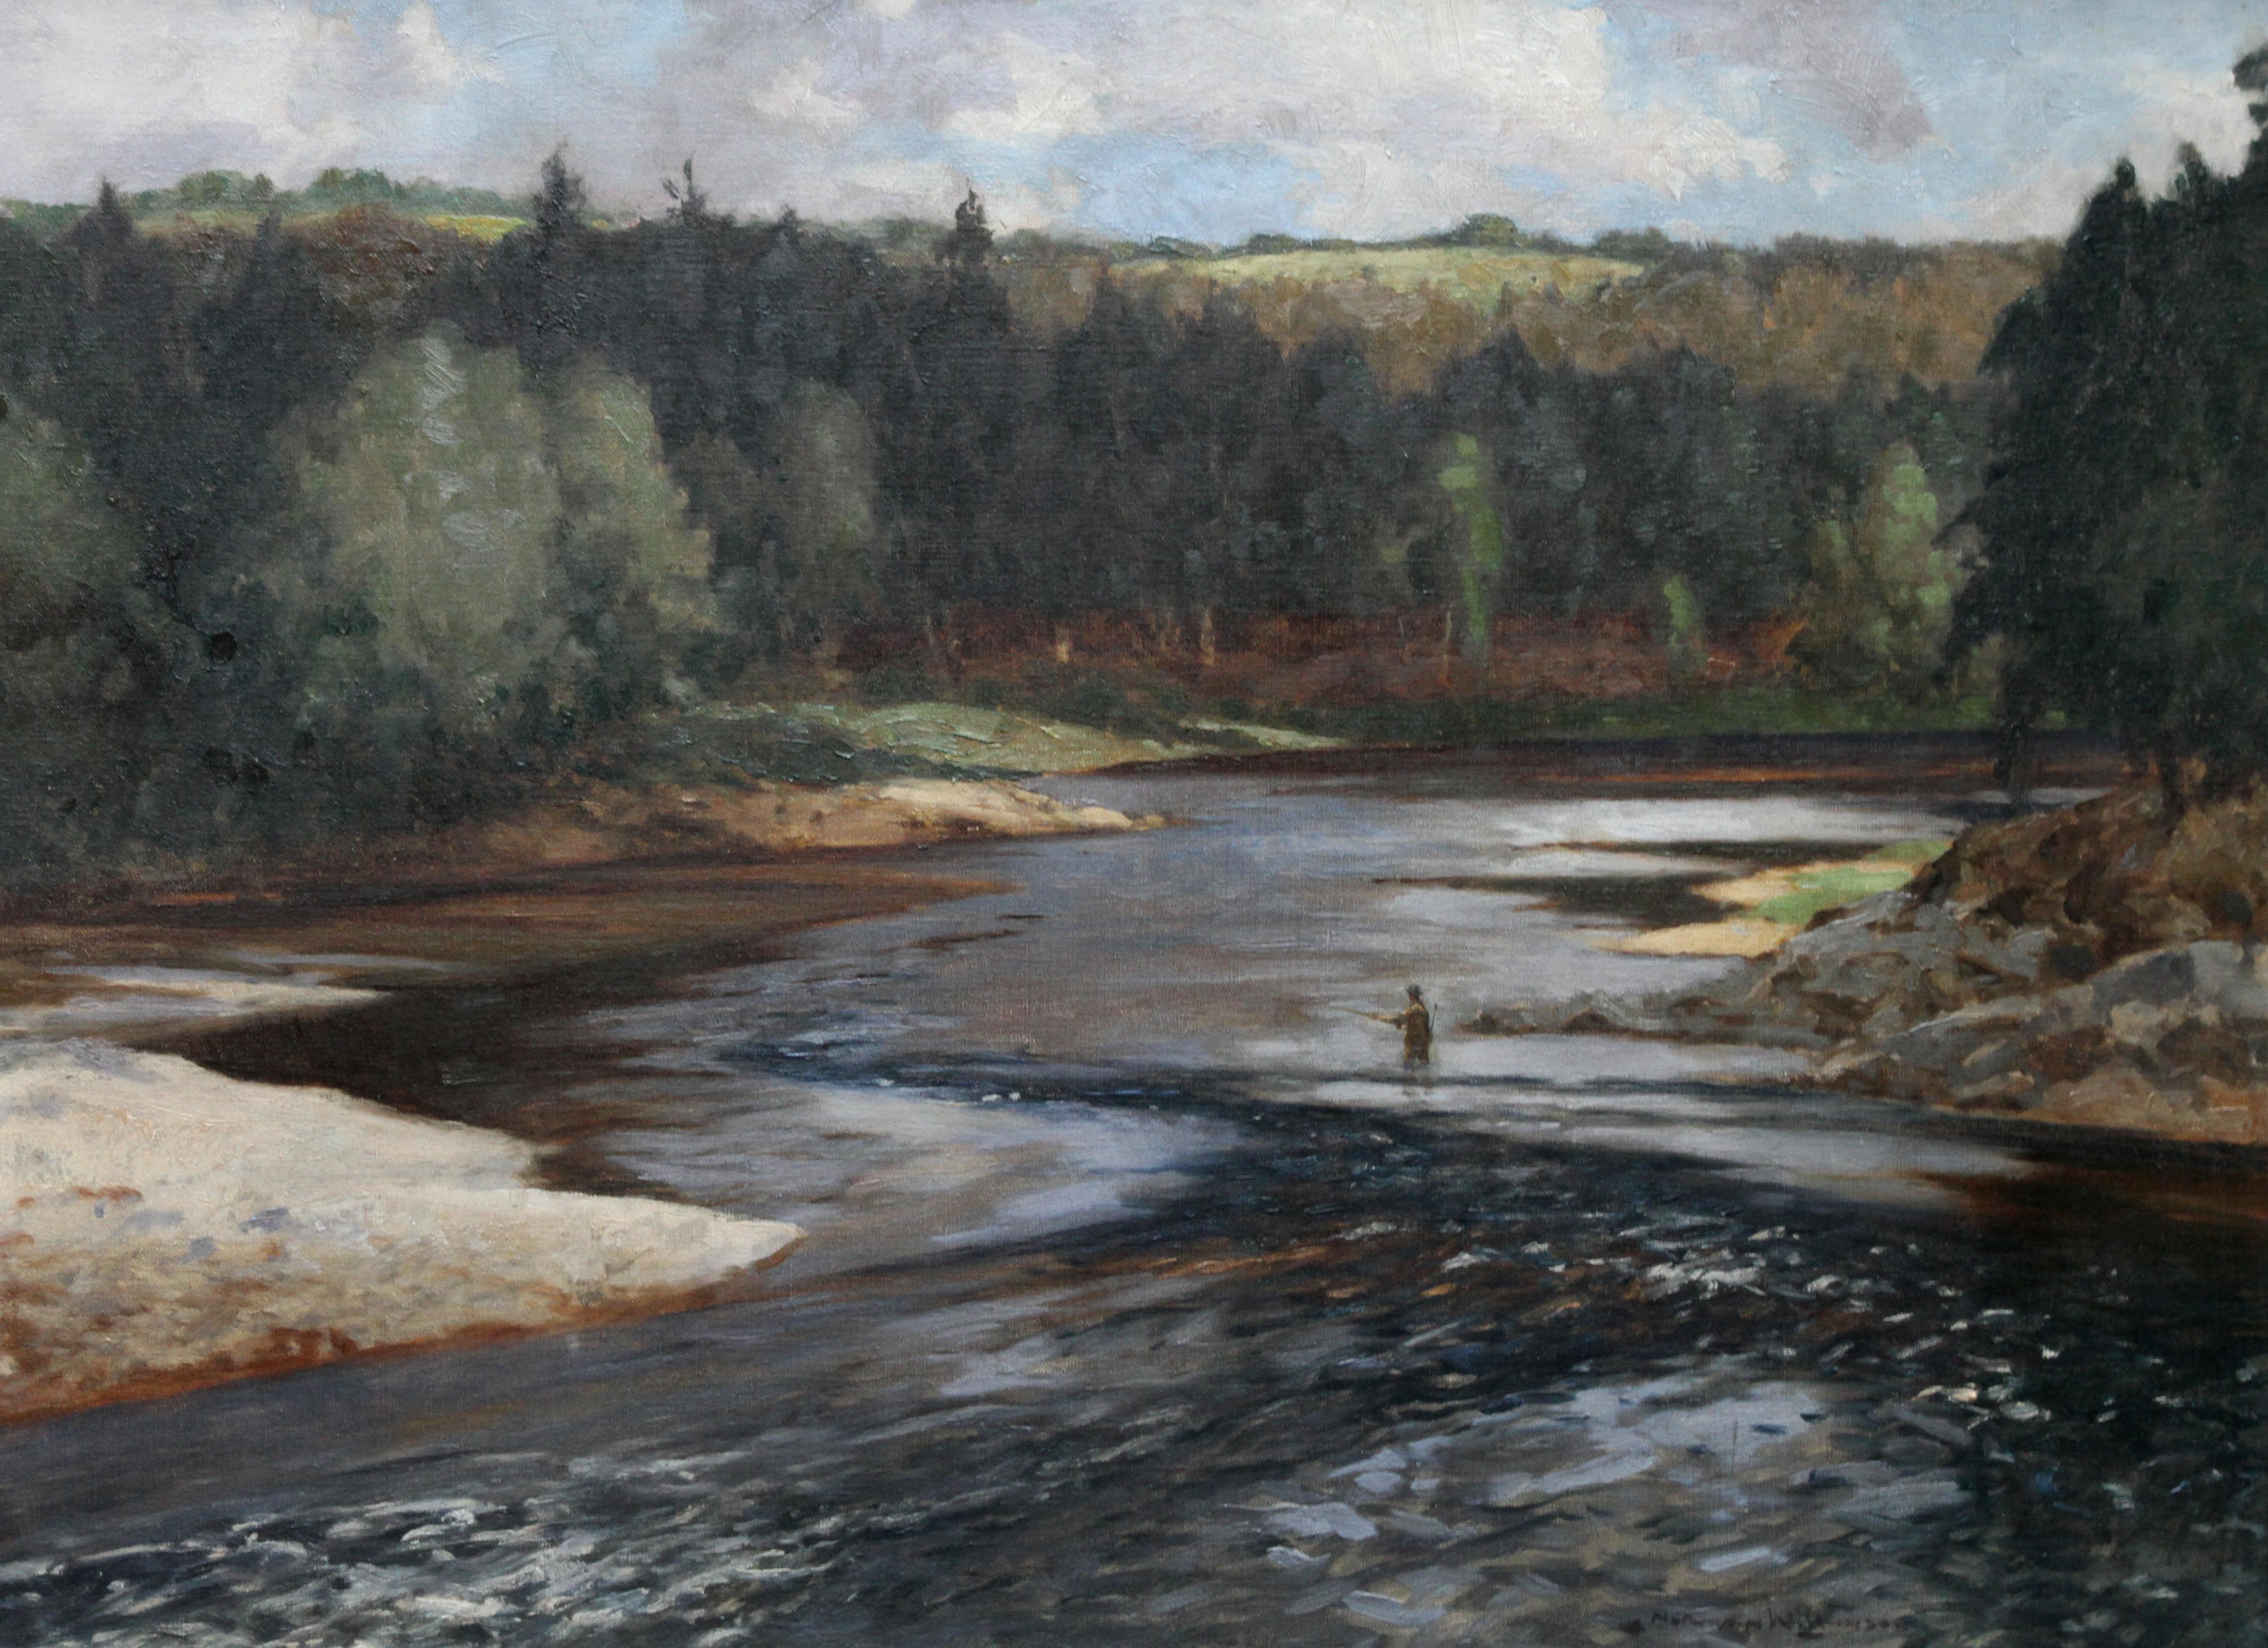 Fisherman on the Upper Spey - British art Scottish river landscape oil painting - Painting by Norman Wilkinson